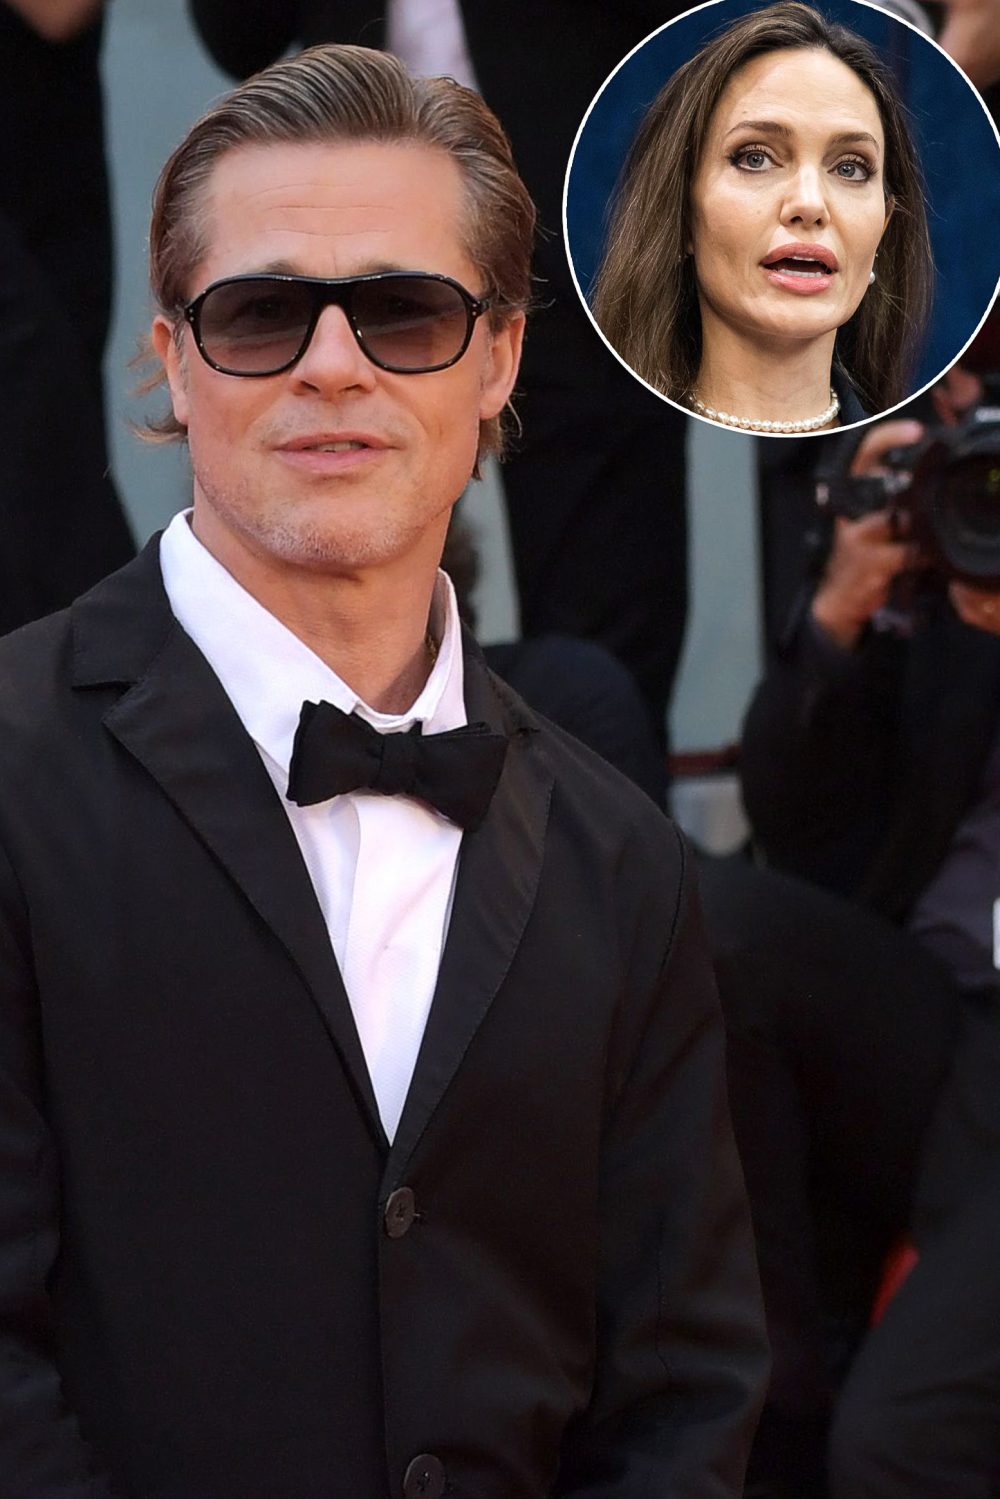 Brad Pitt Is ‘Sick to His Stomach’ Over Angela Jolie’s Abuse Allegations